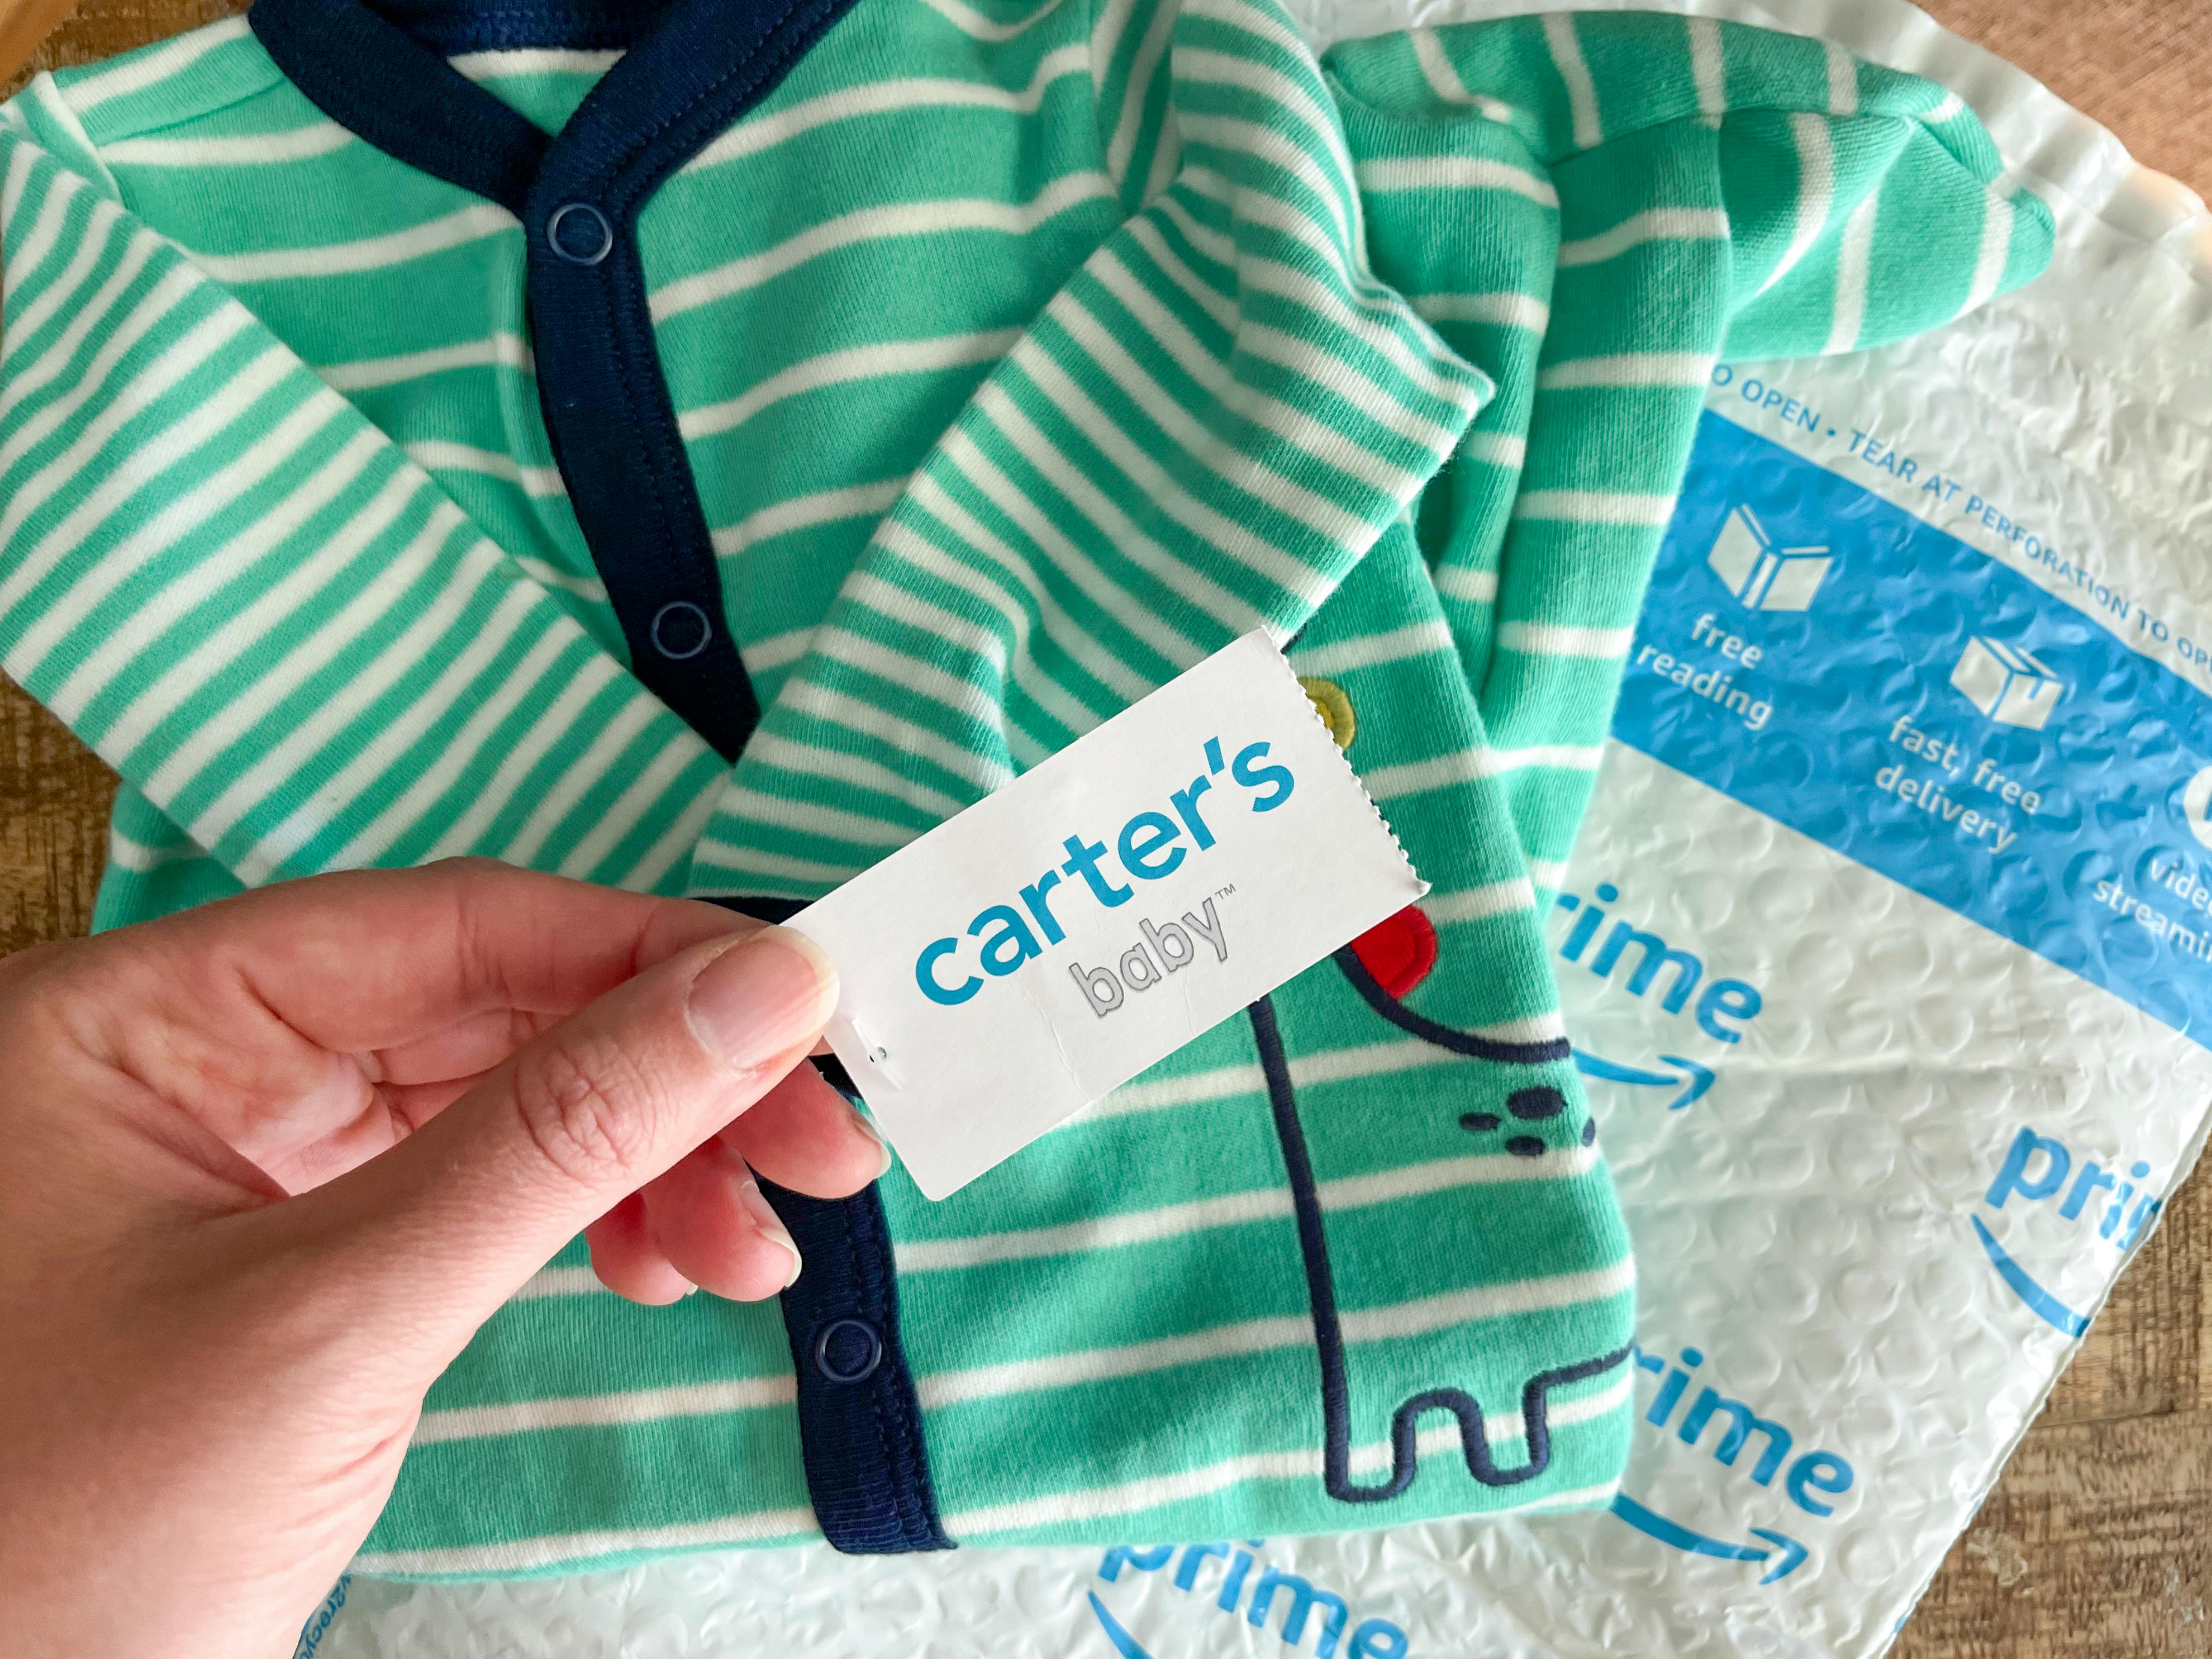 How to Save at Carter's — 15 Shopping Hacks - The Krazy Coupon Lady